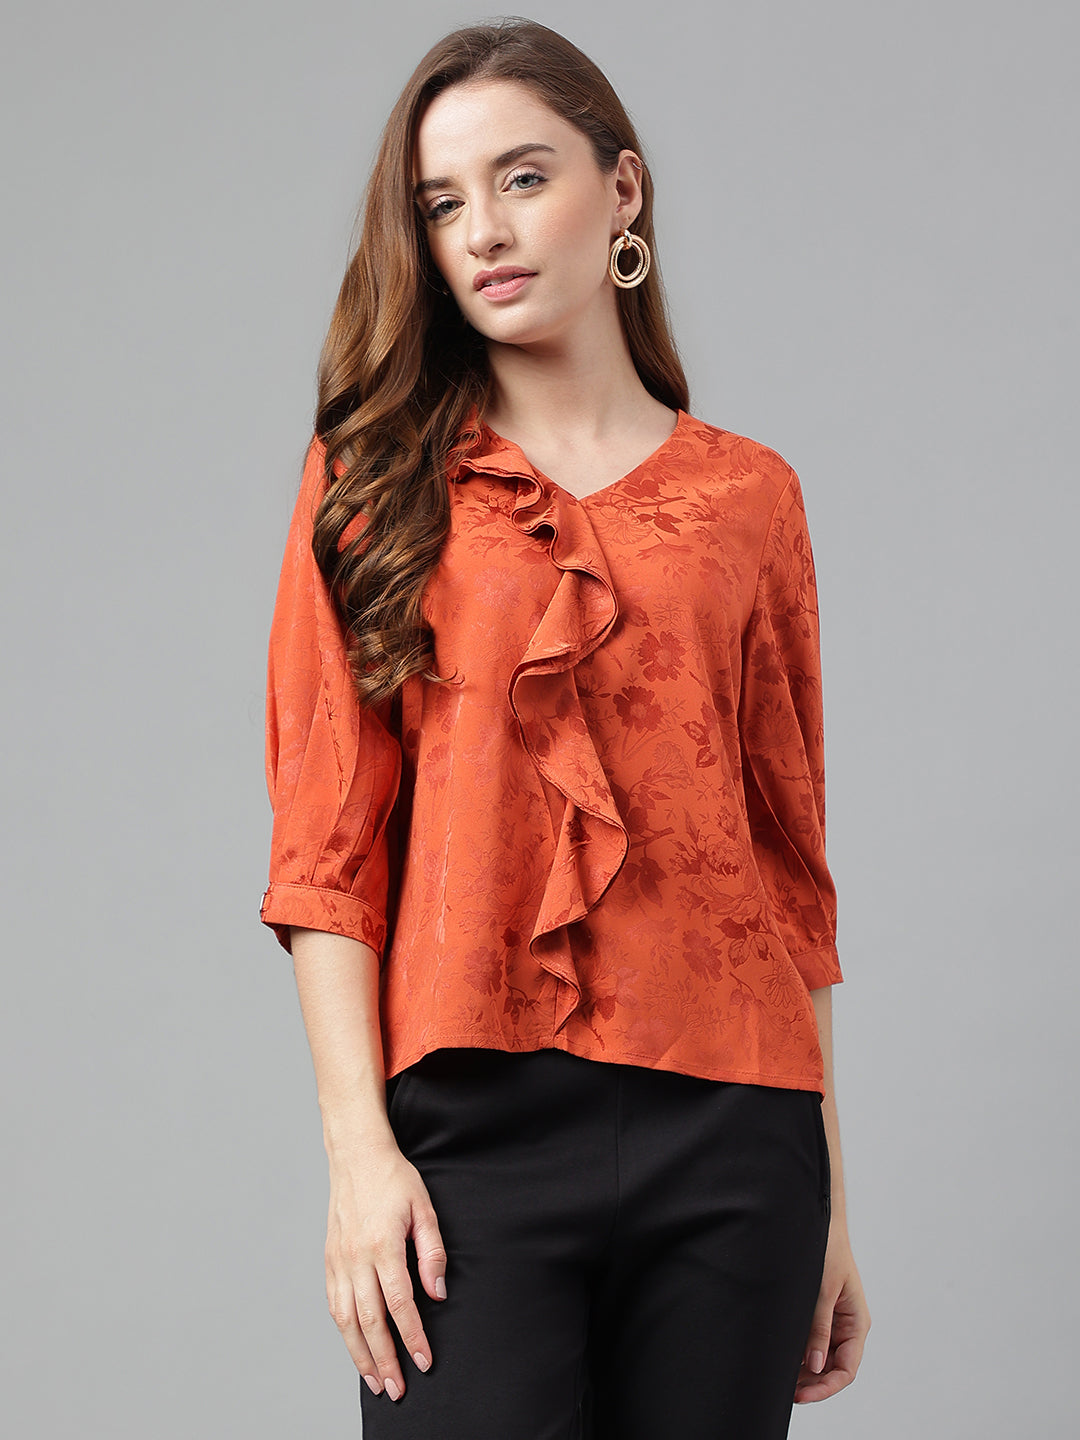 Rust 3/4 Sleeve Solid With Ruffles Blouse